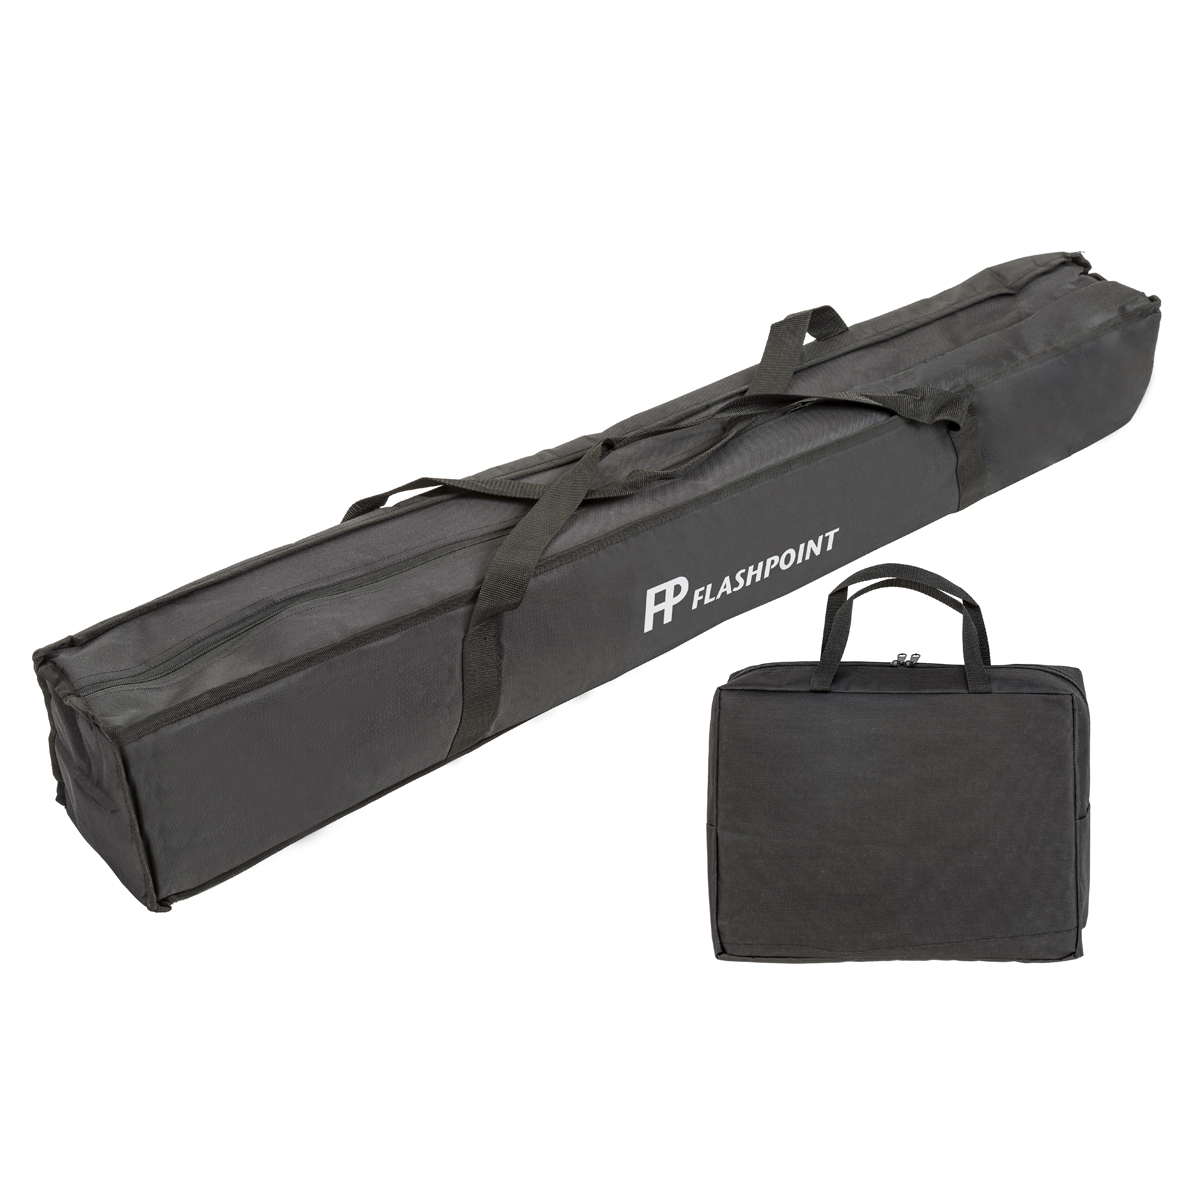 Carrying Case Included